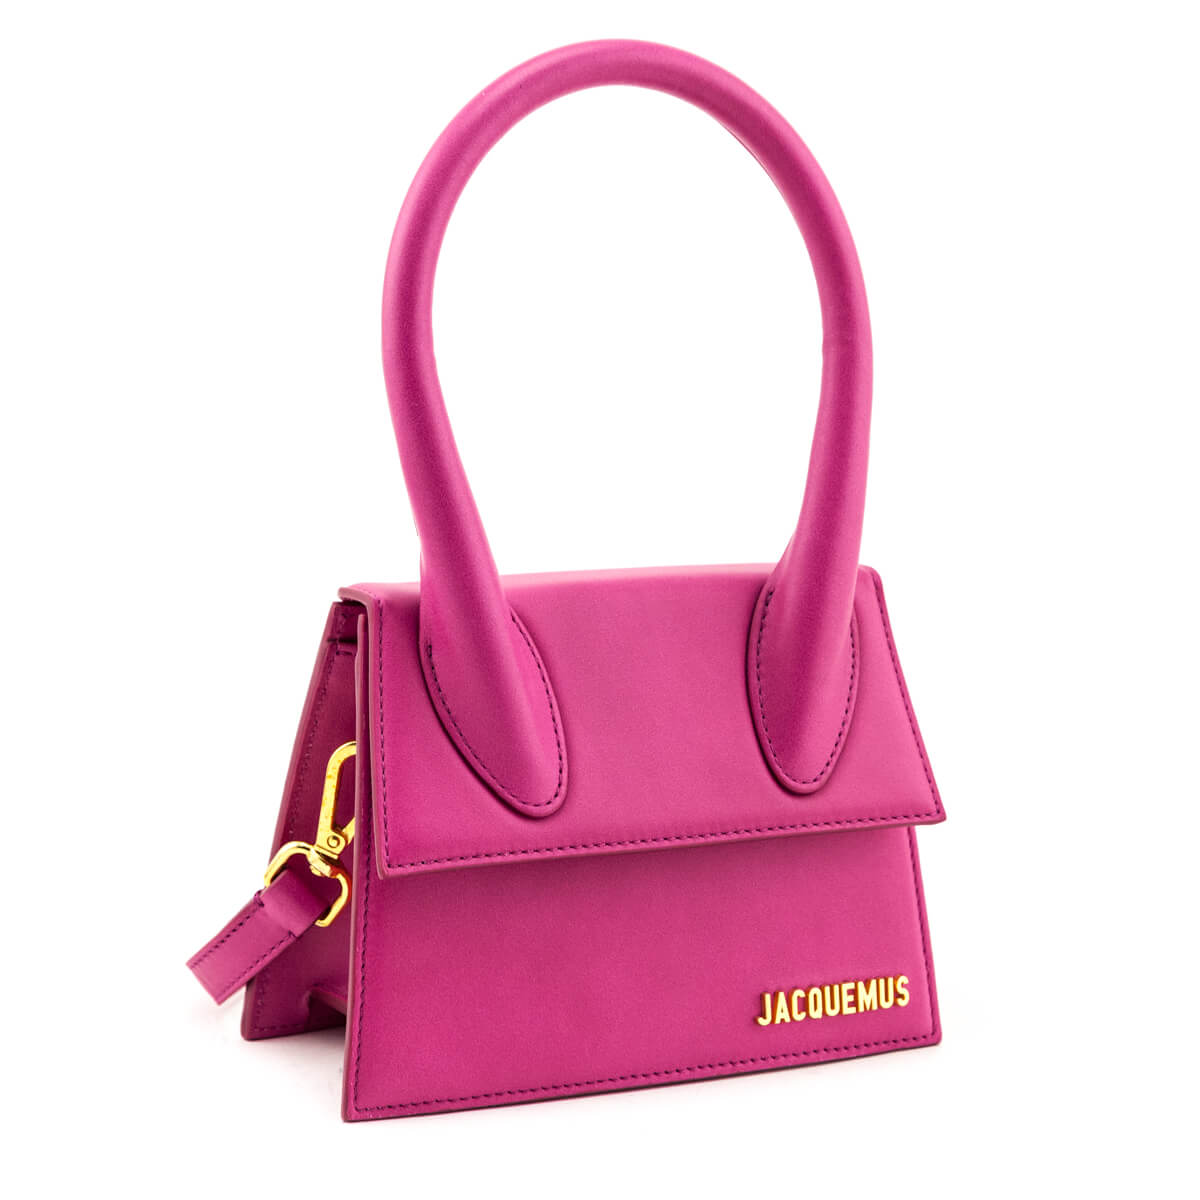 Jacquemus Pink Smooth Leather Medium Le Chiquito Bag - Love that Bag etc - Preowned Authentic Designer Handbags & Preloved Fashions